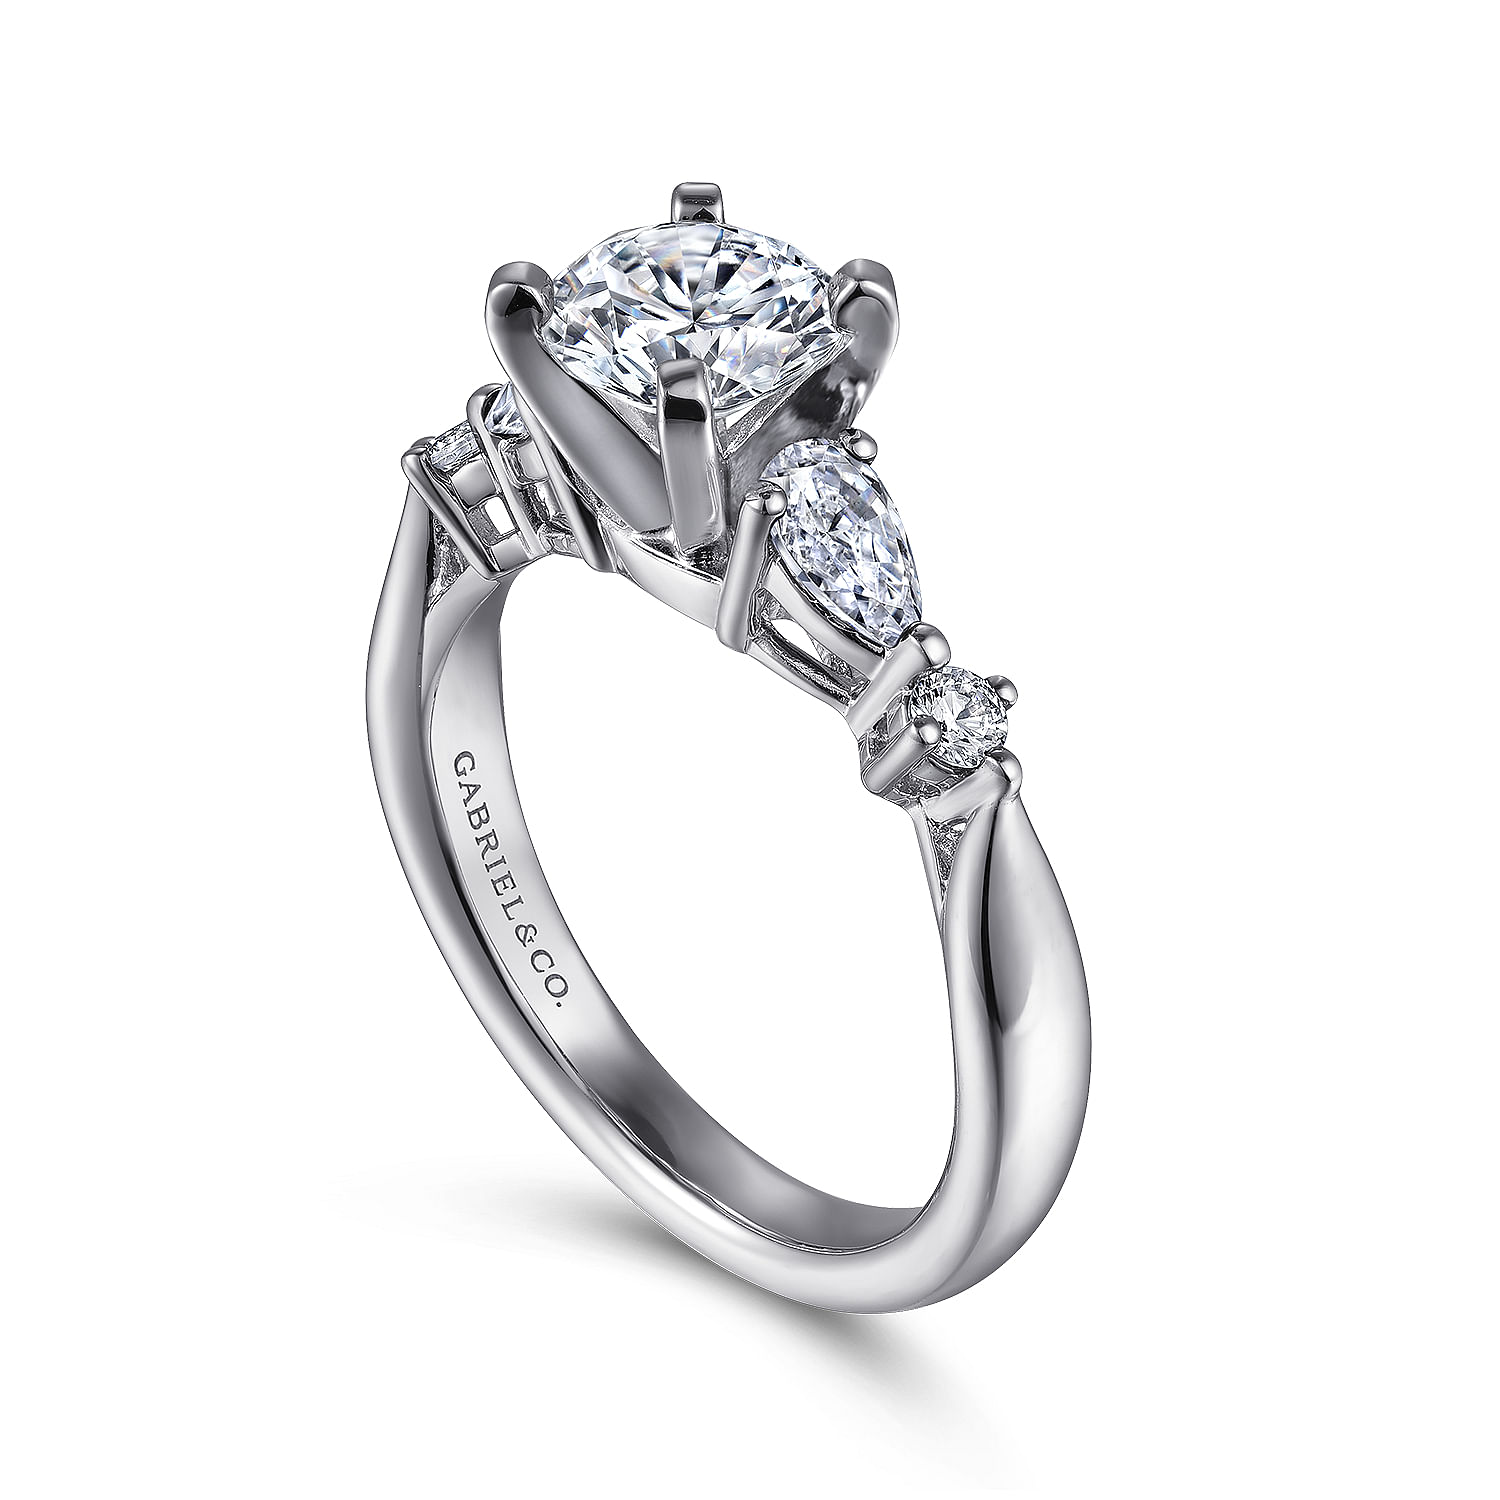 Carrie - 14K White Gold Round Five Stone Diamond Engagement Ring - 0.47 ct - Shot 3